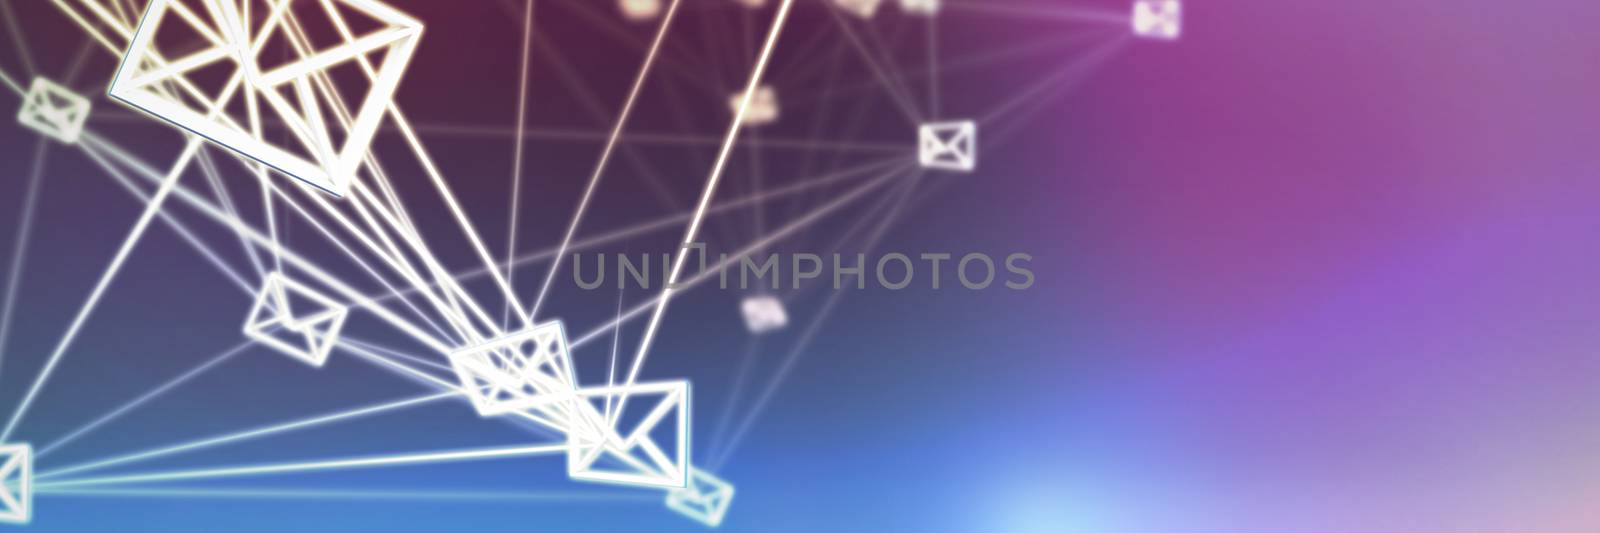 Composite image of abstract image of message icons by Wavebreakmedia